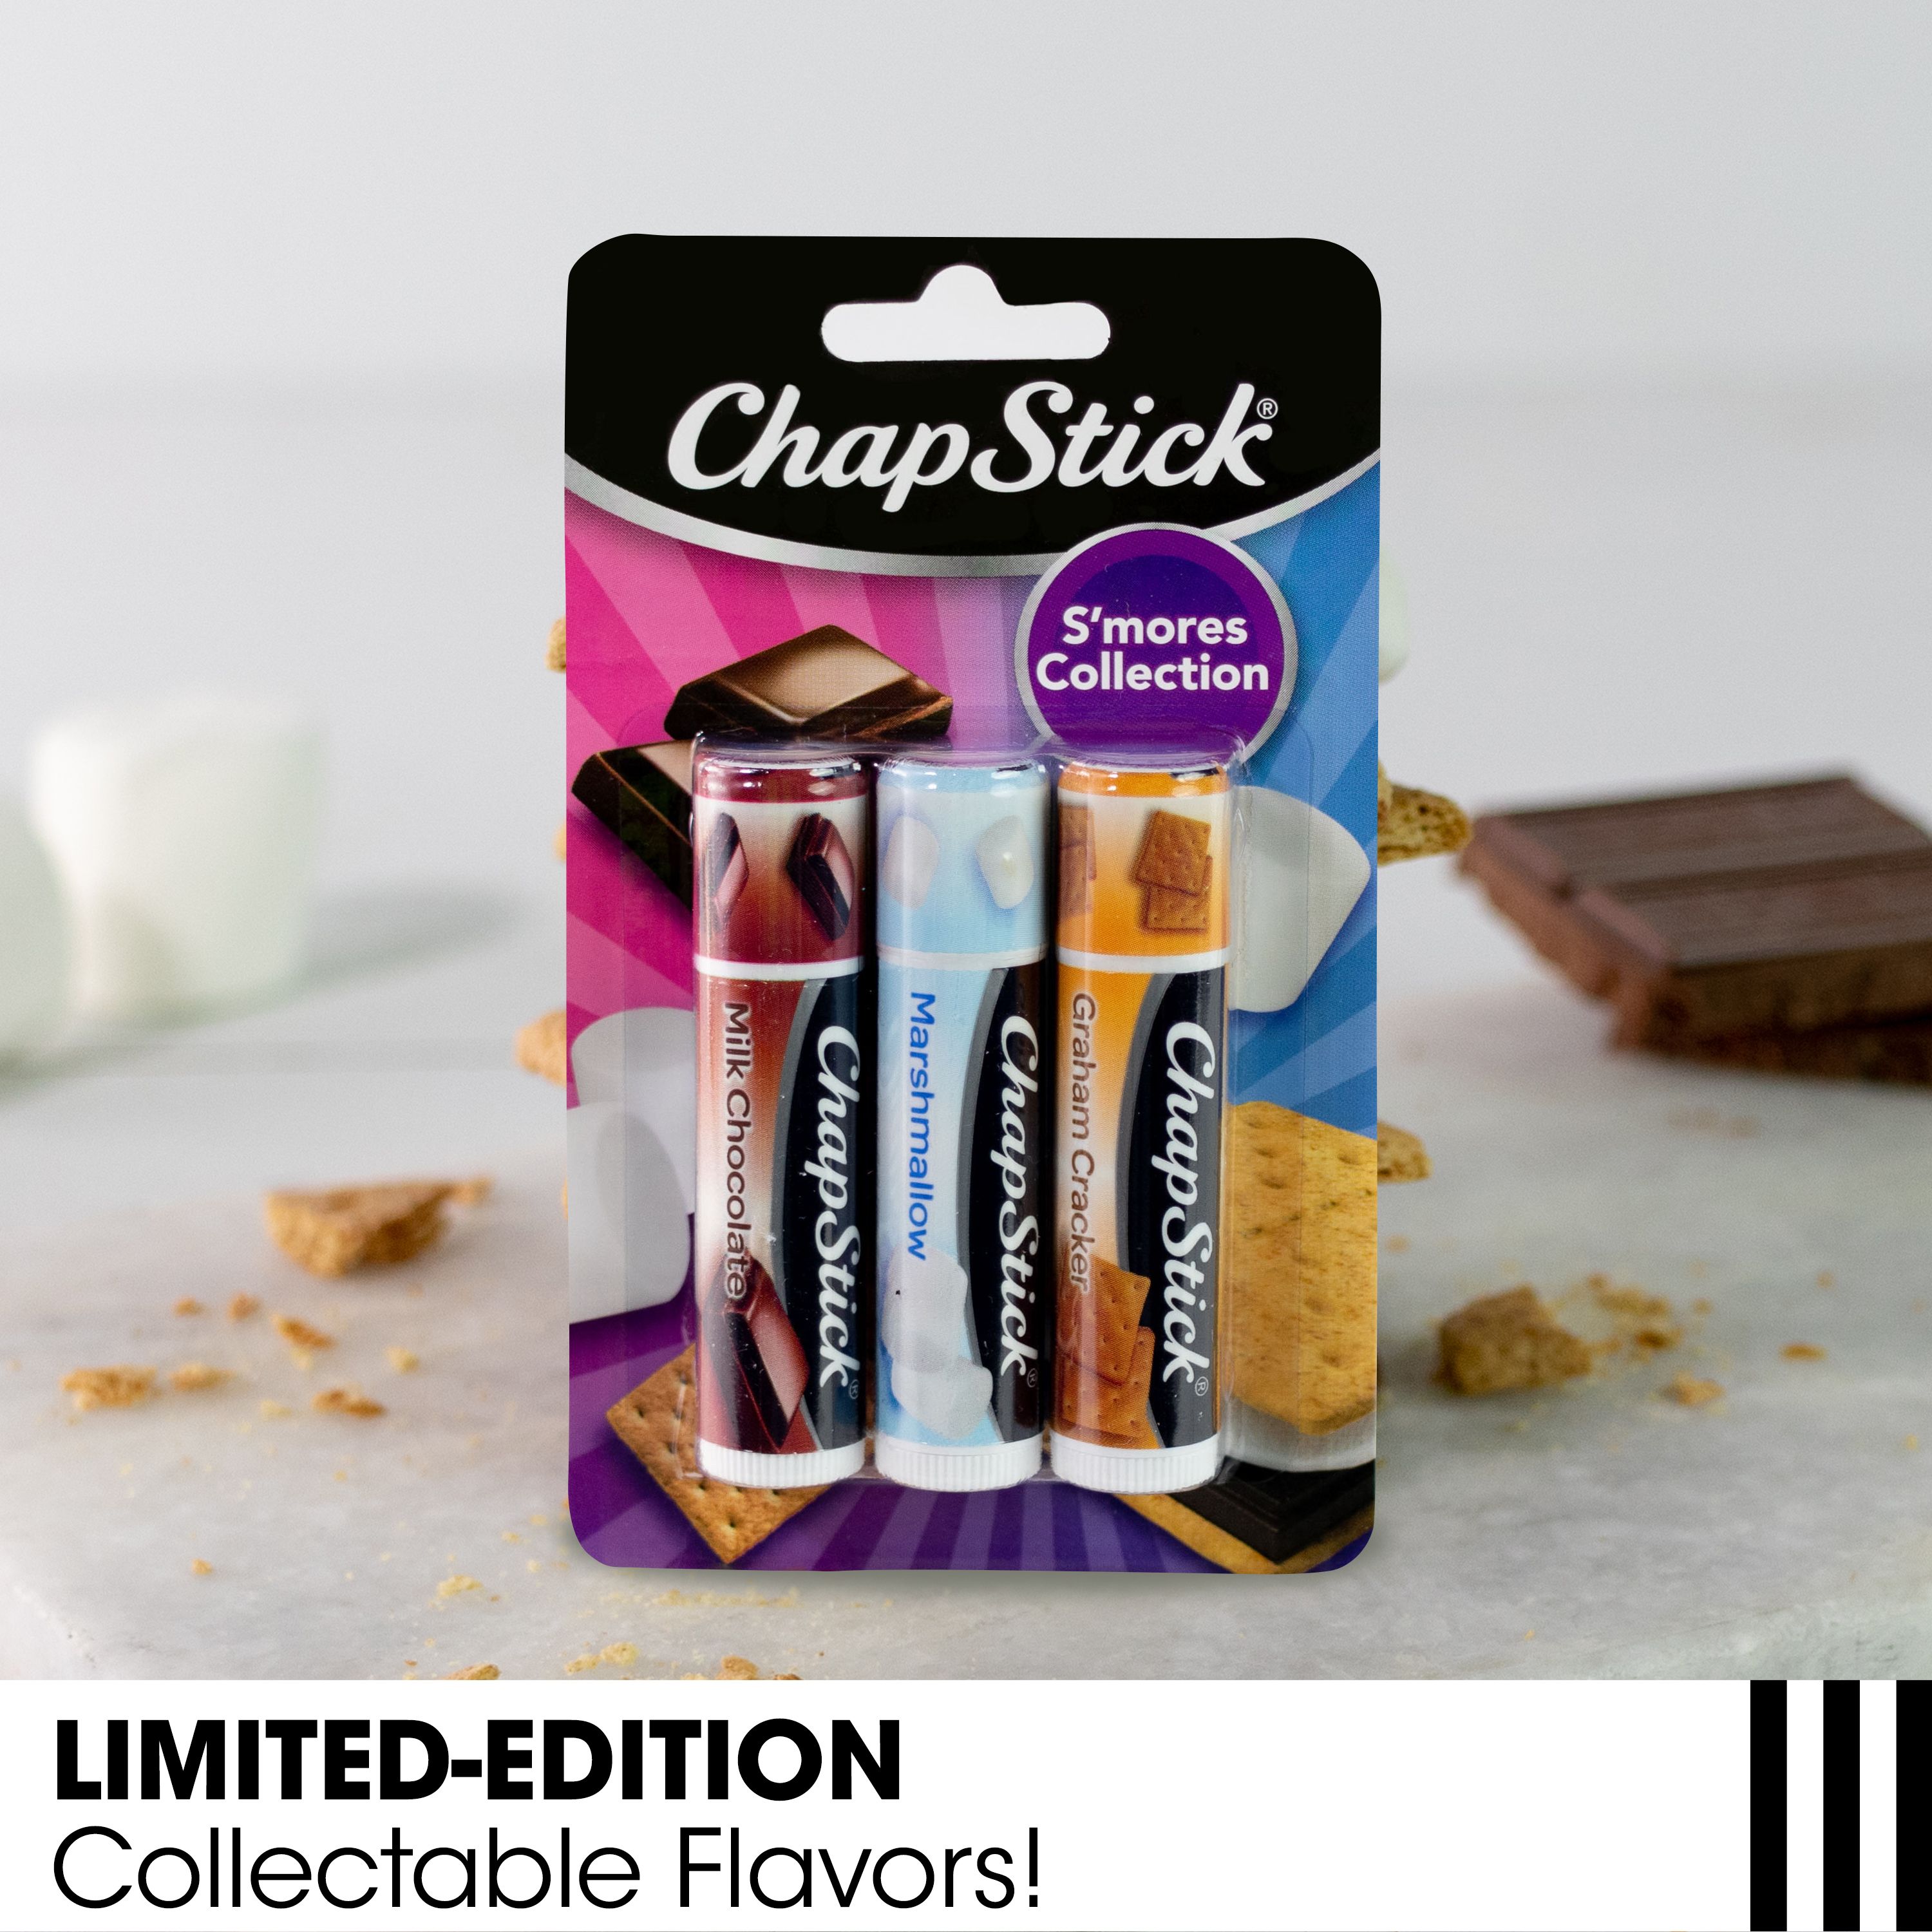 ChapStick S'mores Collection Flavored Lip Balm, Multi-Flavored, 0.15 Oz, 3 Pack - image 4 of 6